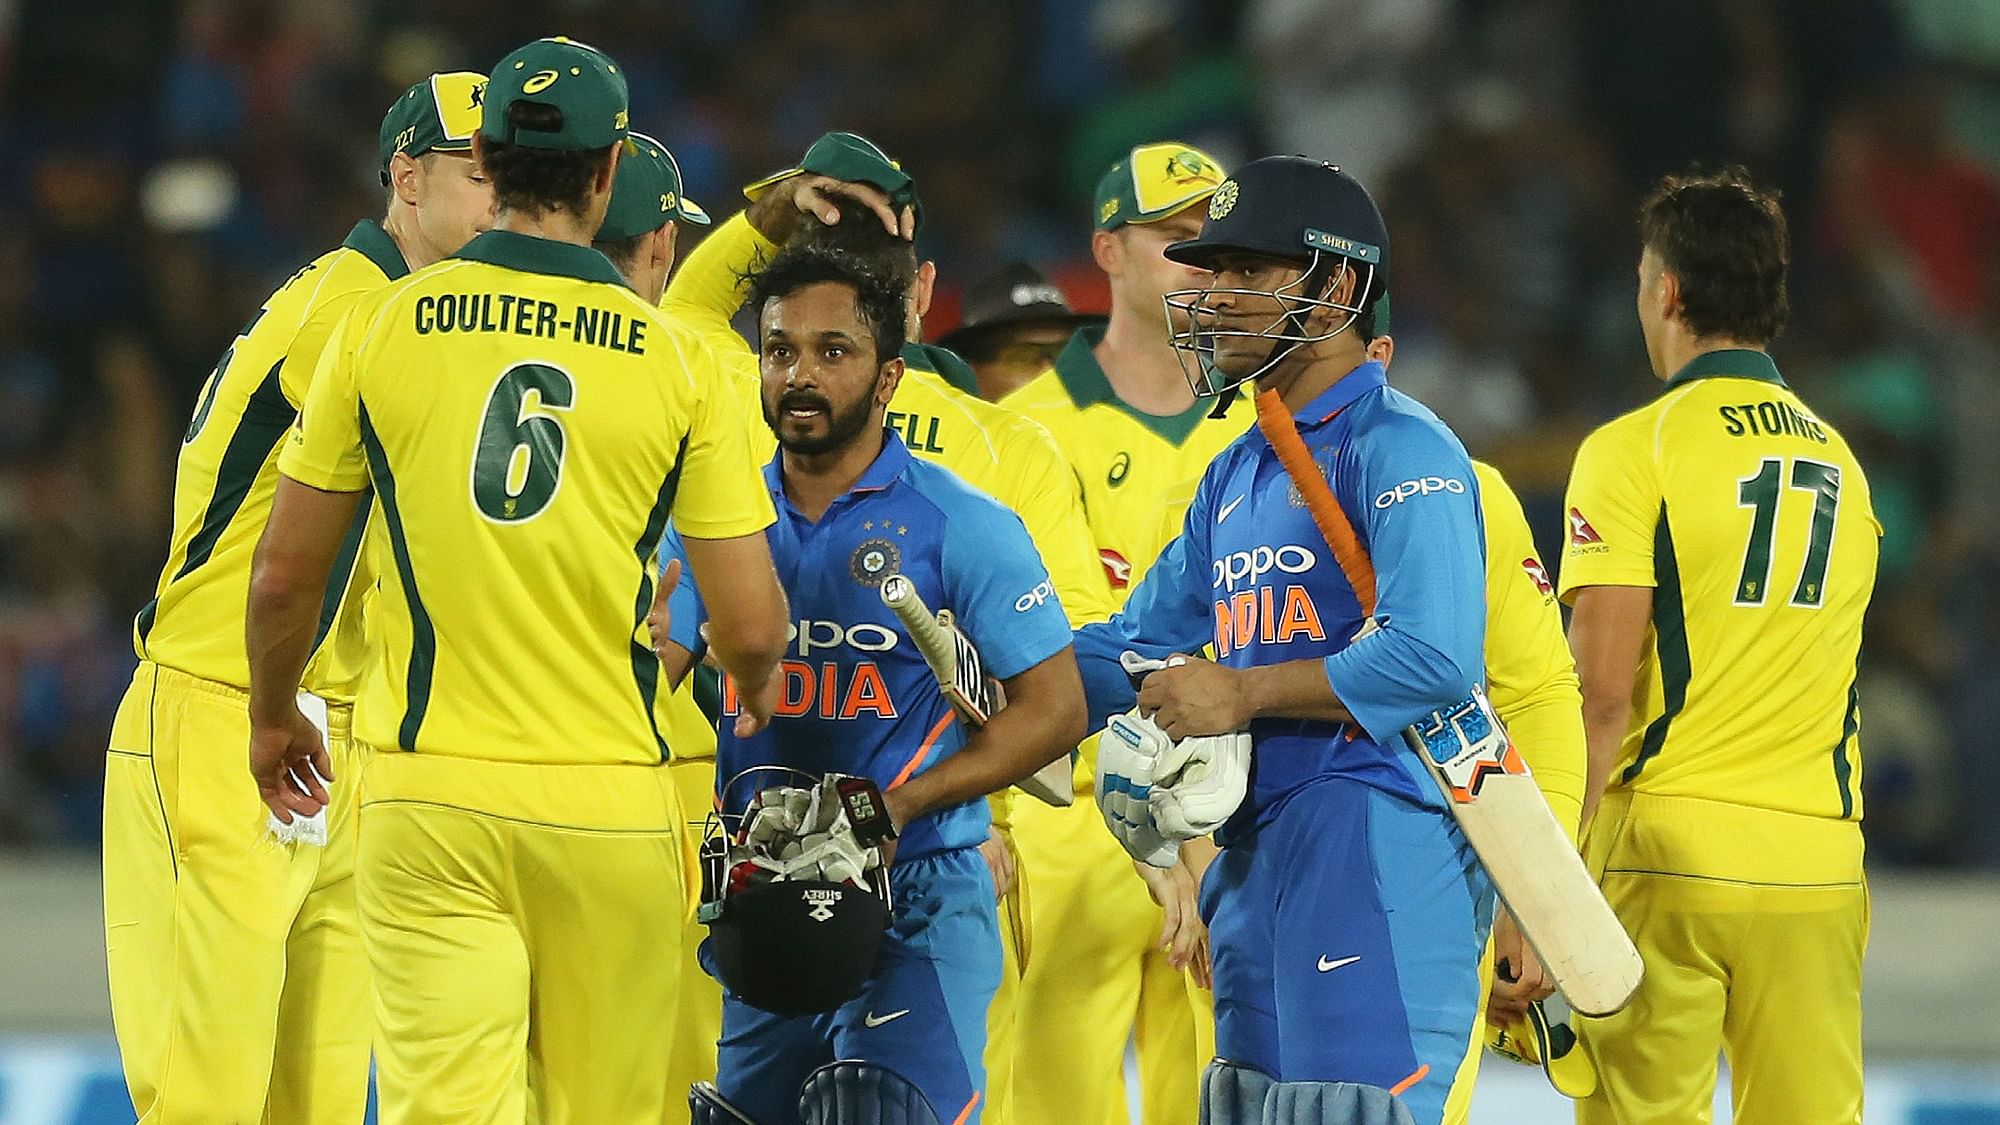 MS Dhoni and Kedar Jadhav put up an unbeaten 141-run stand for the fifth wicket.